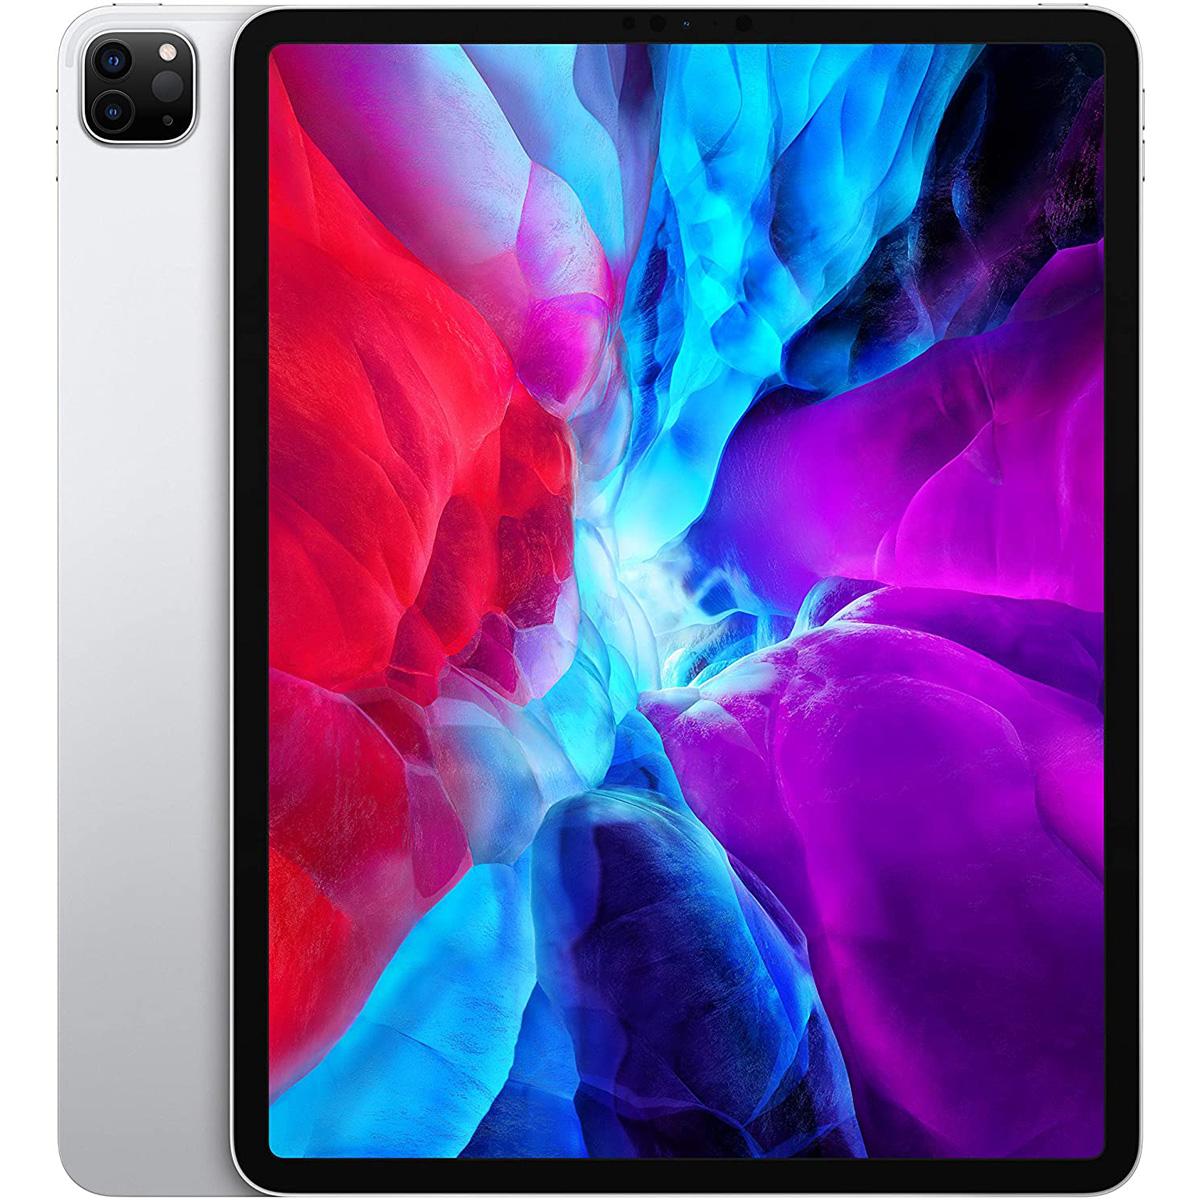 128GB Apple iPad Pro 12.9in Wifi Tablet for $899.99 Shipped